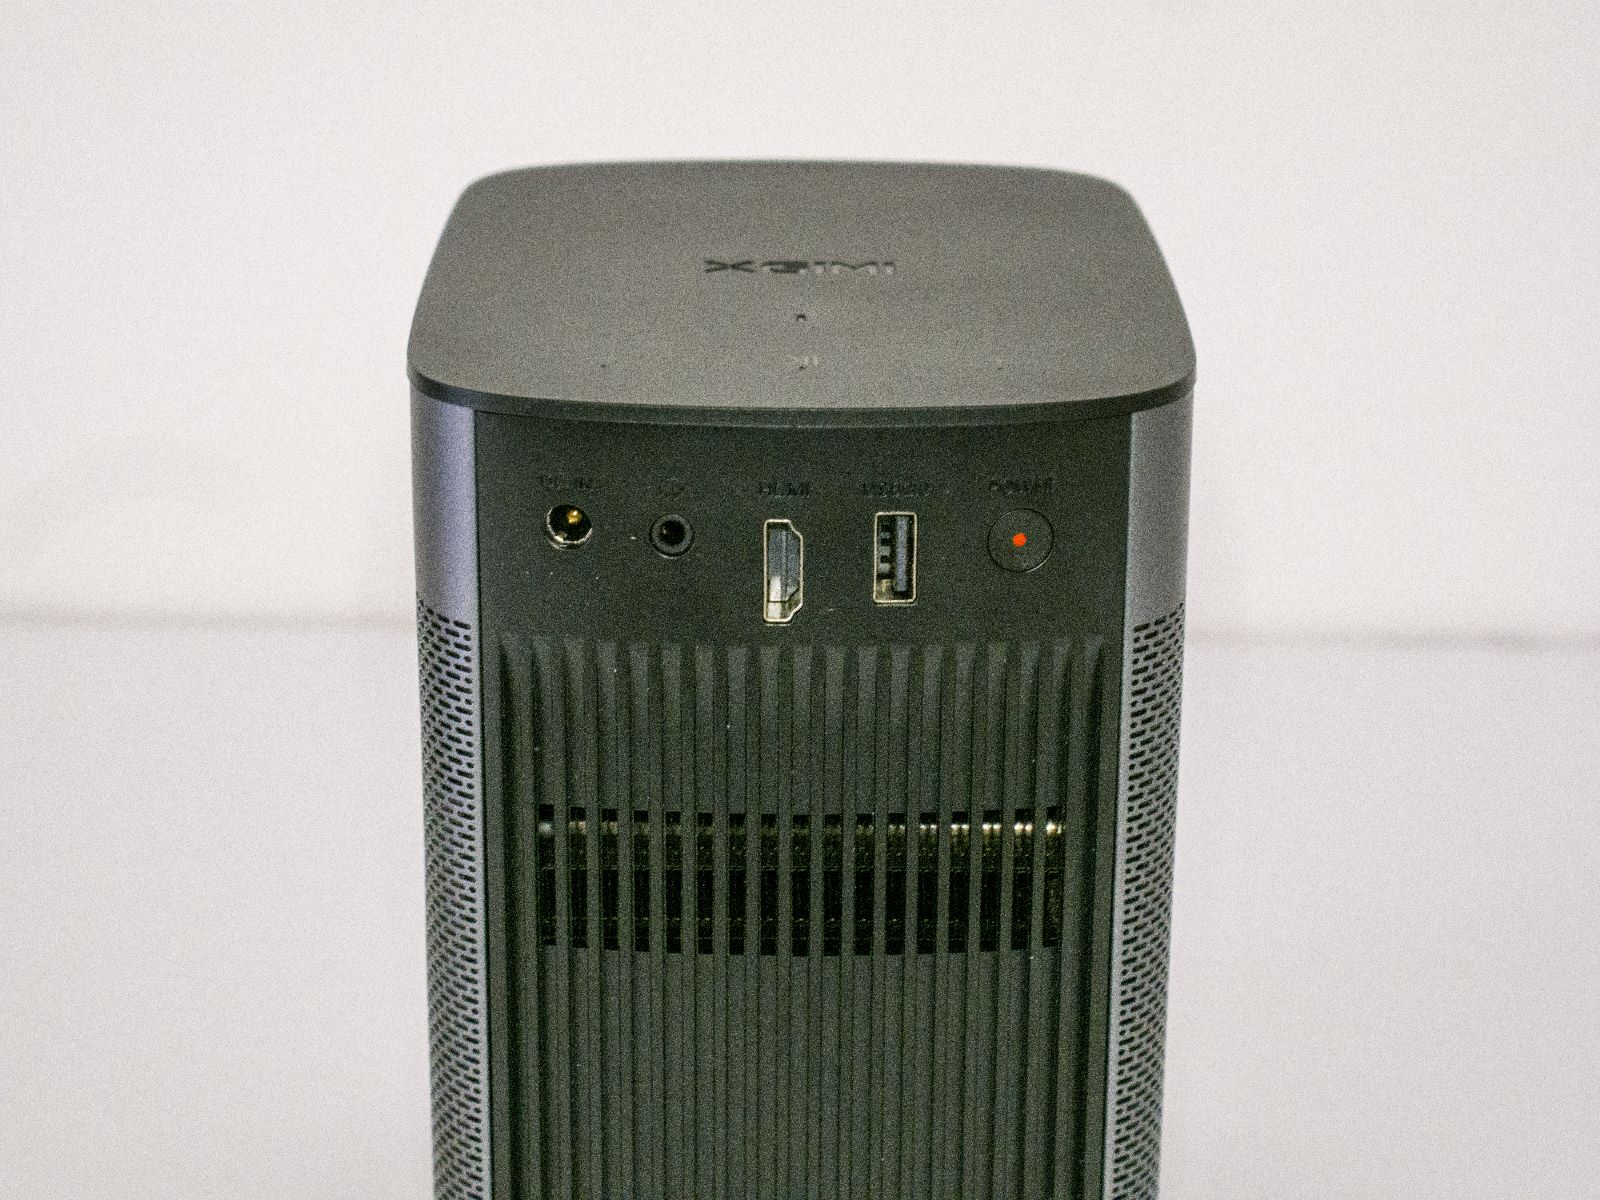 XGIMI Halo+ review: the top of portable projectors